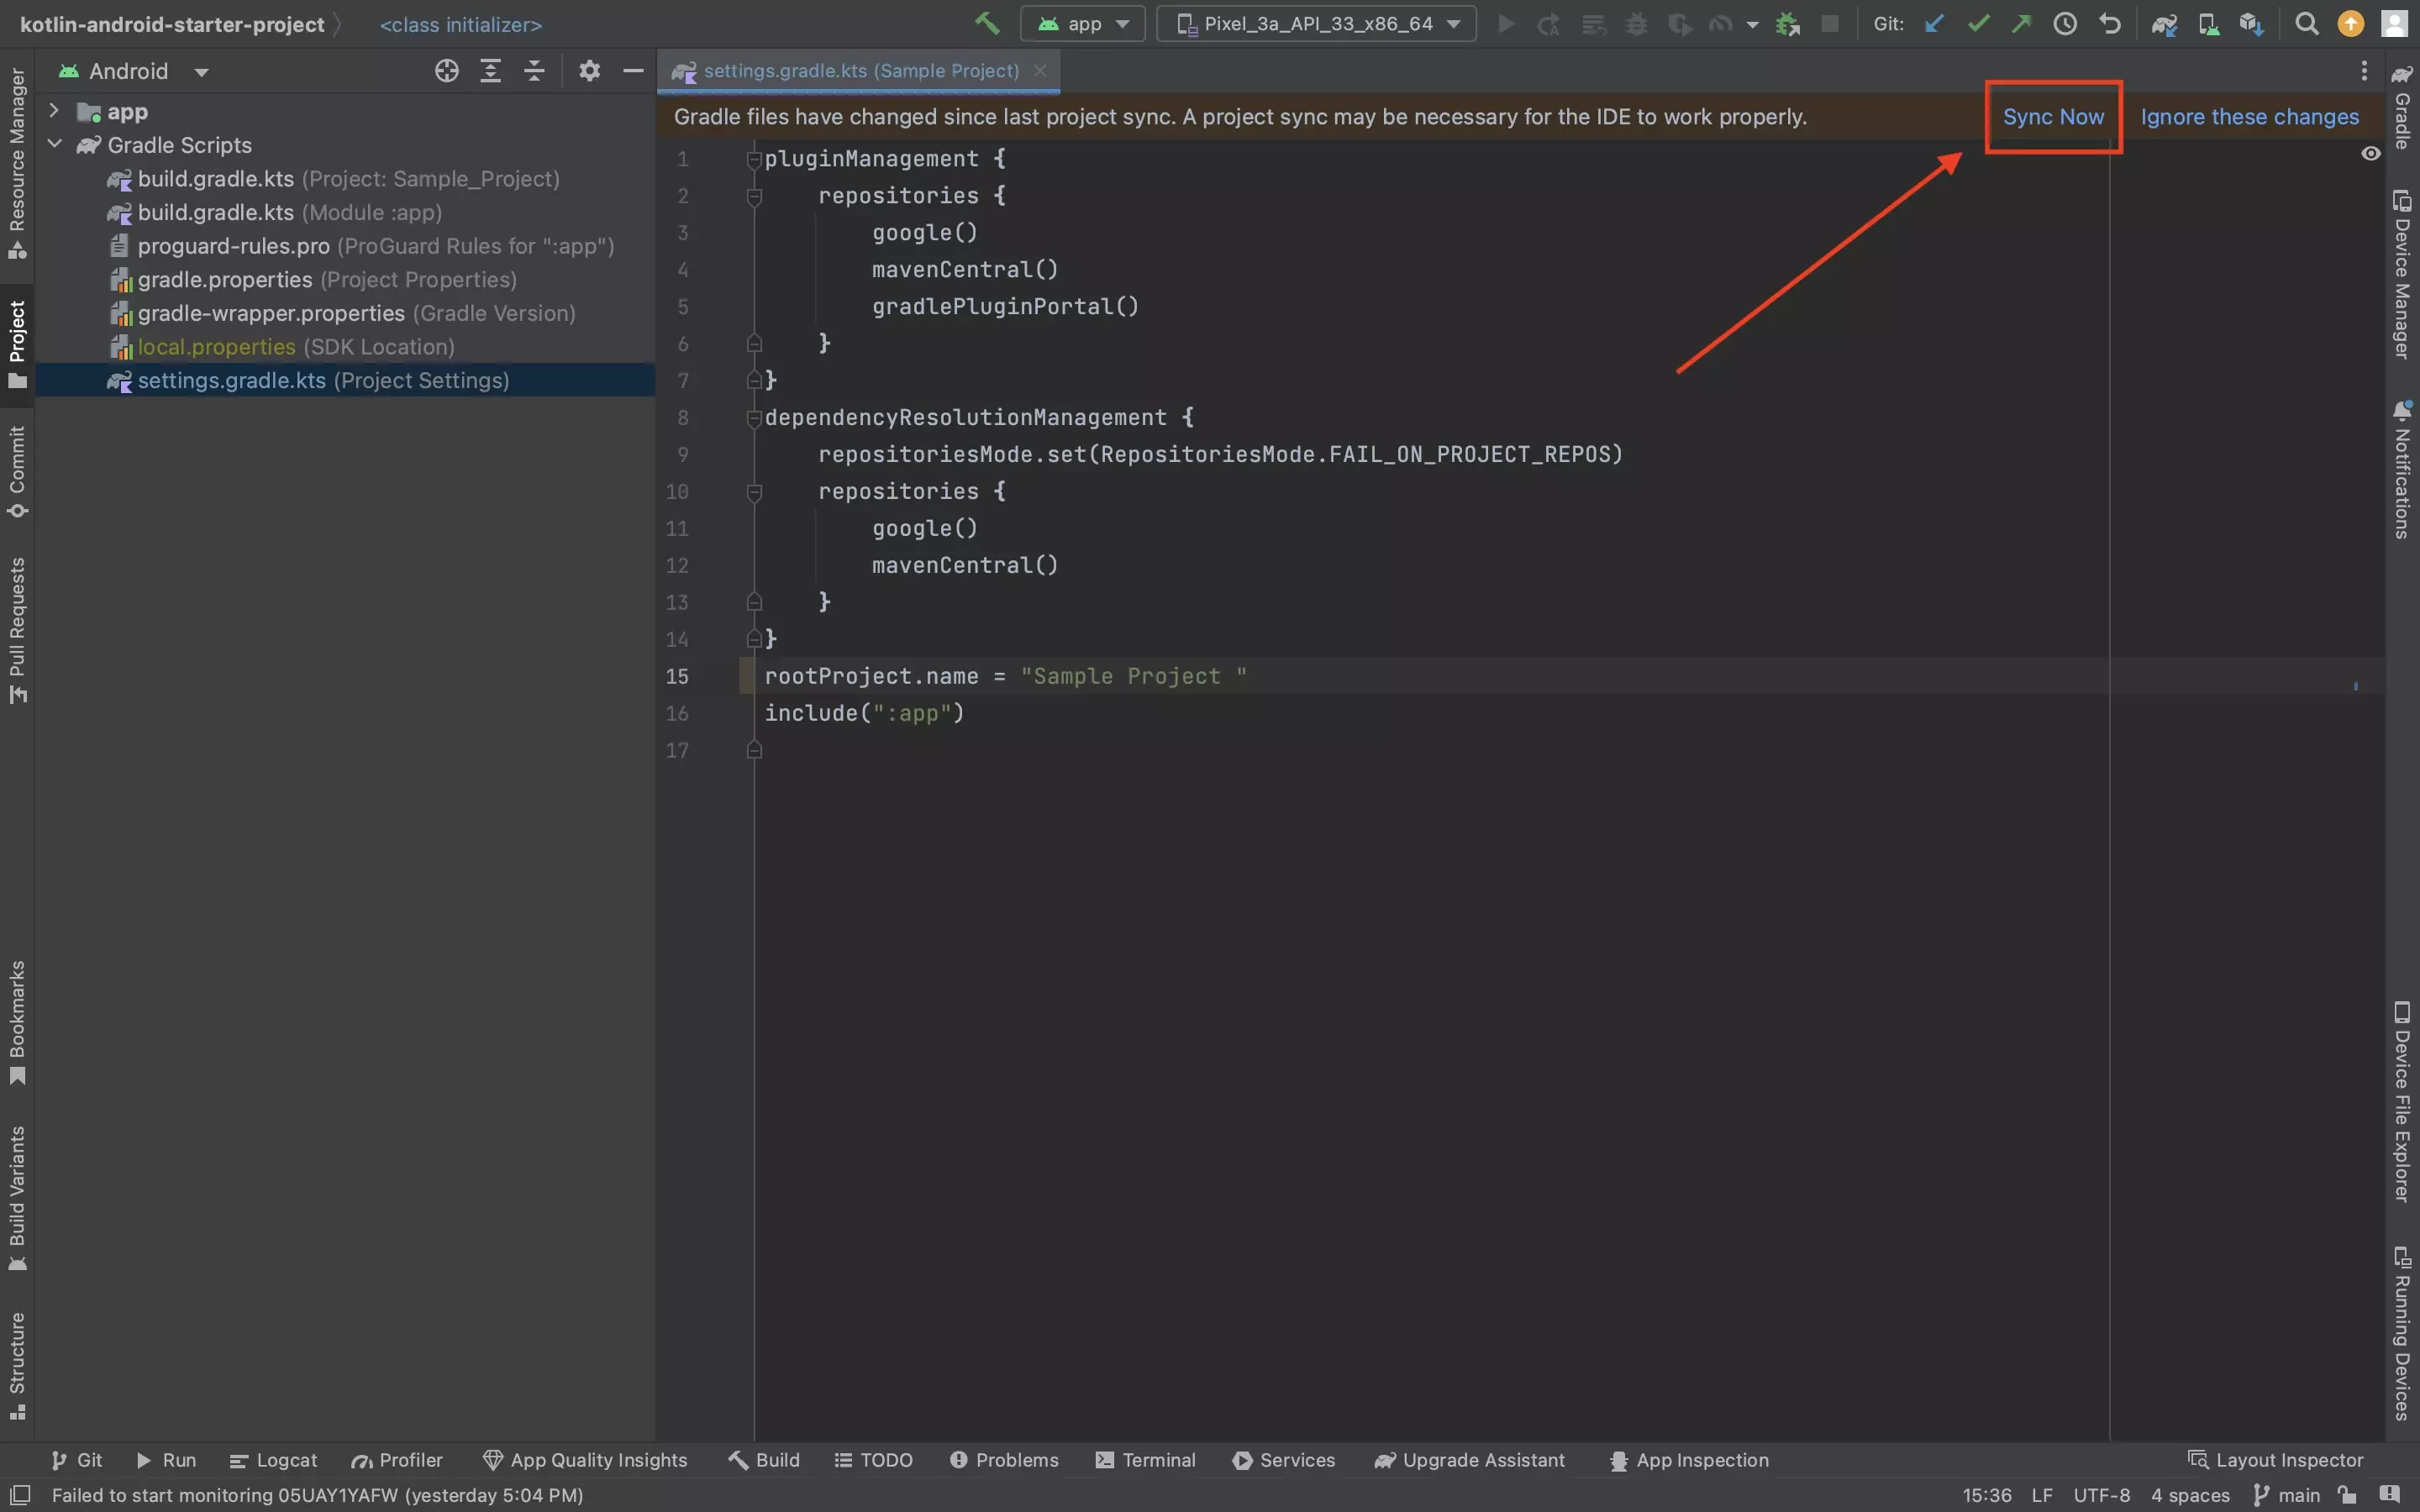 A screenshot of Android Studio showing a gradle file that has recently been modified. Highlighted is the "Sync Now" button that appears on the right of the prompt at the top of the Gradle file. Click this button to sync the gradle files with the project.